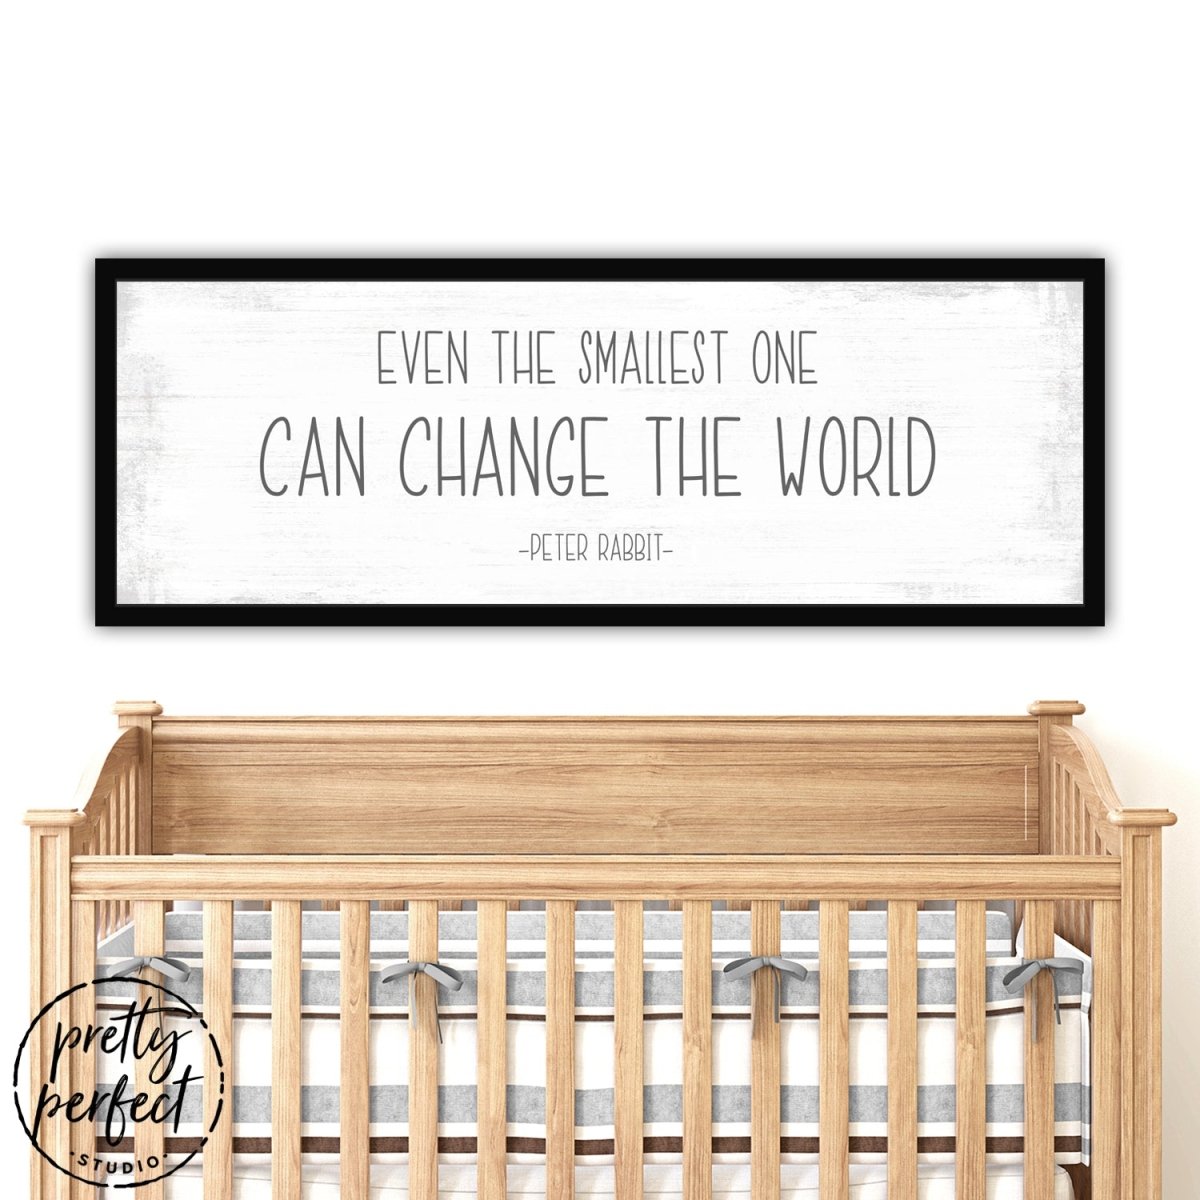 Even The Smallest One Can Change the World Sign Above Crib - Pretty Perfect Studio